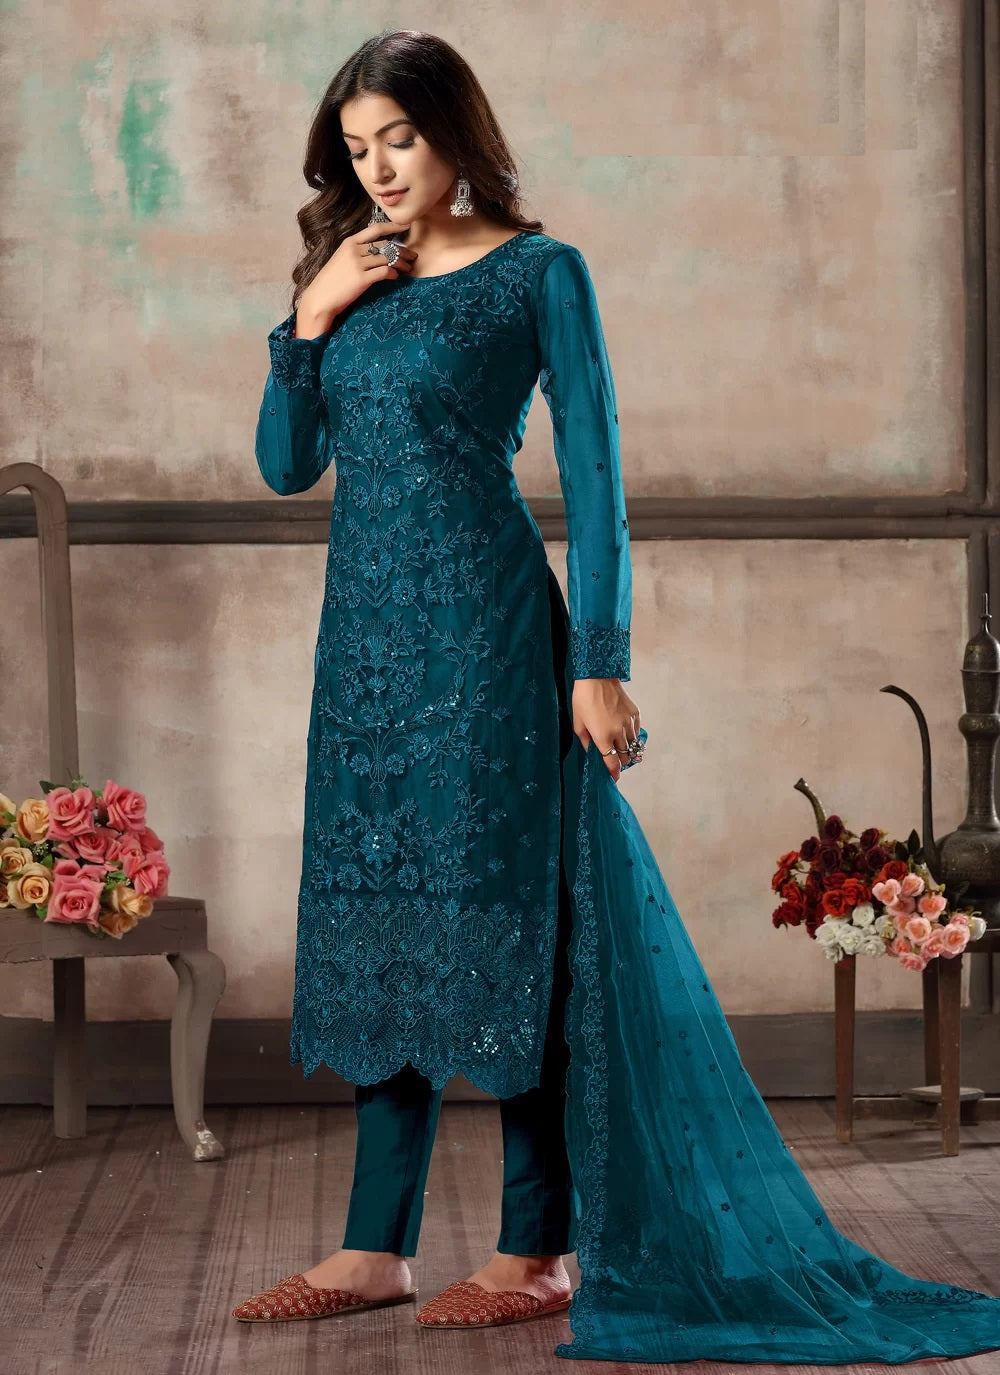 Teal Blue Net Embroidered Straight Cut Salwar Suit